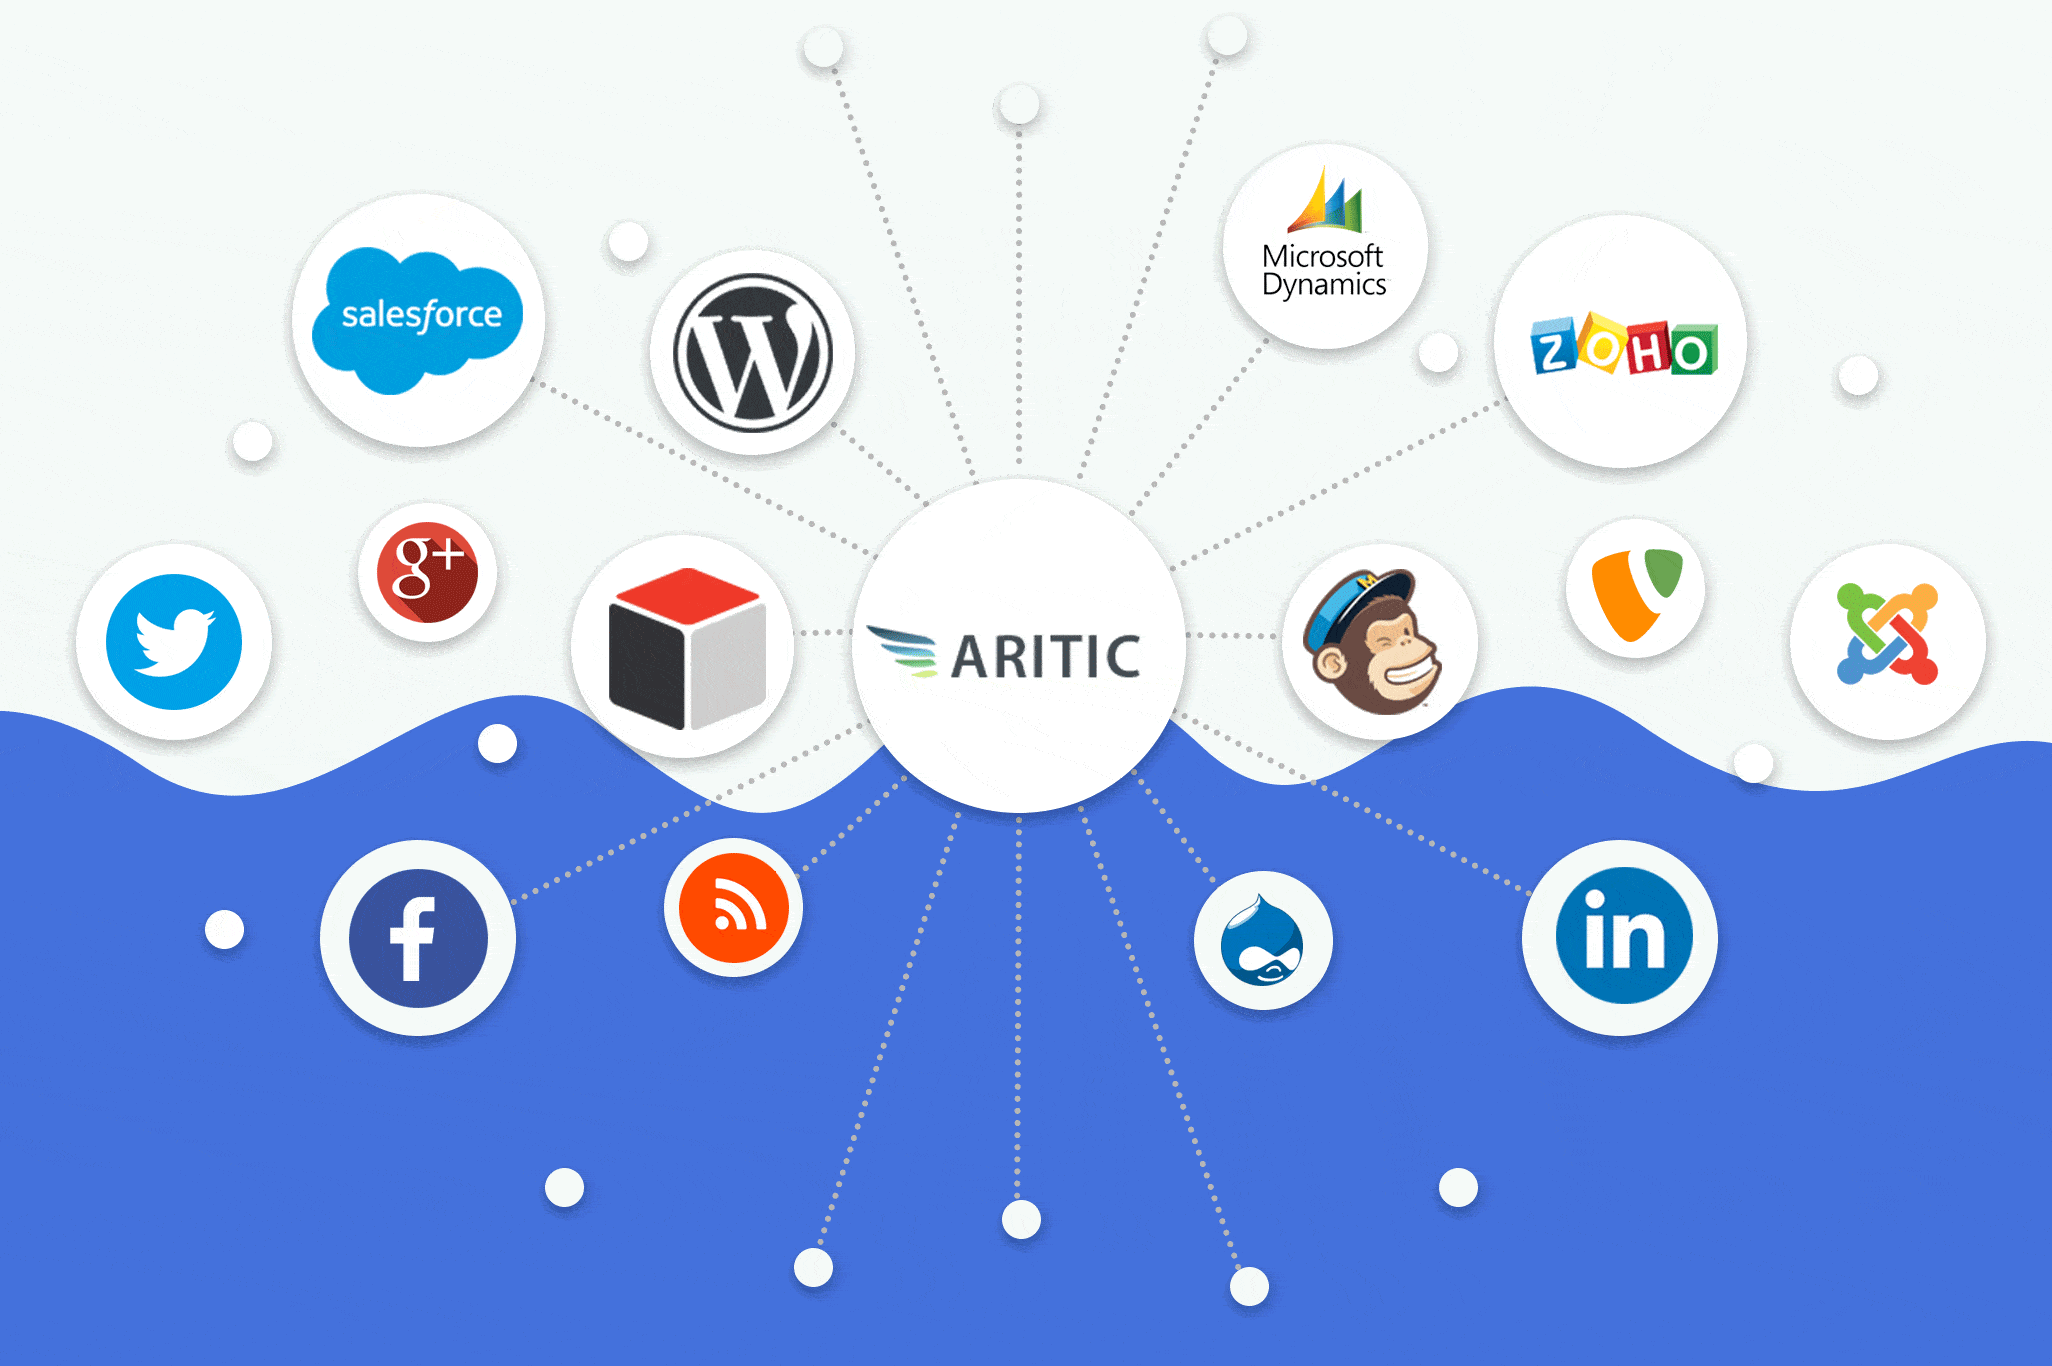 Integration from Aritic